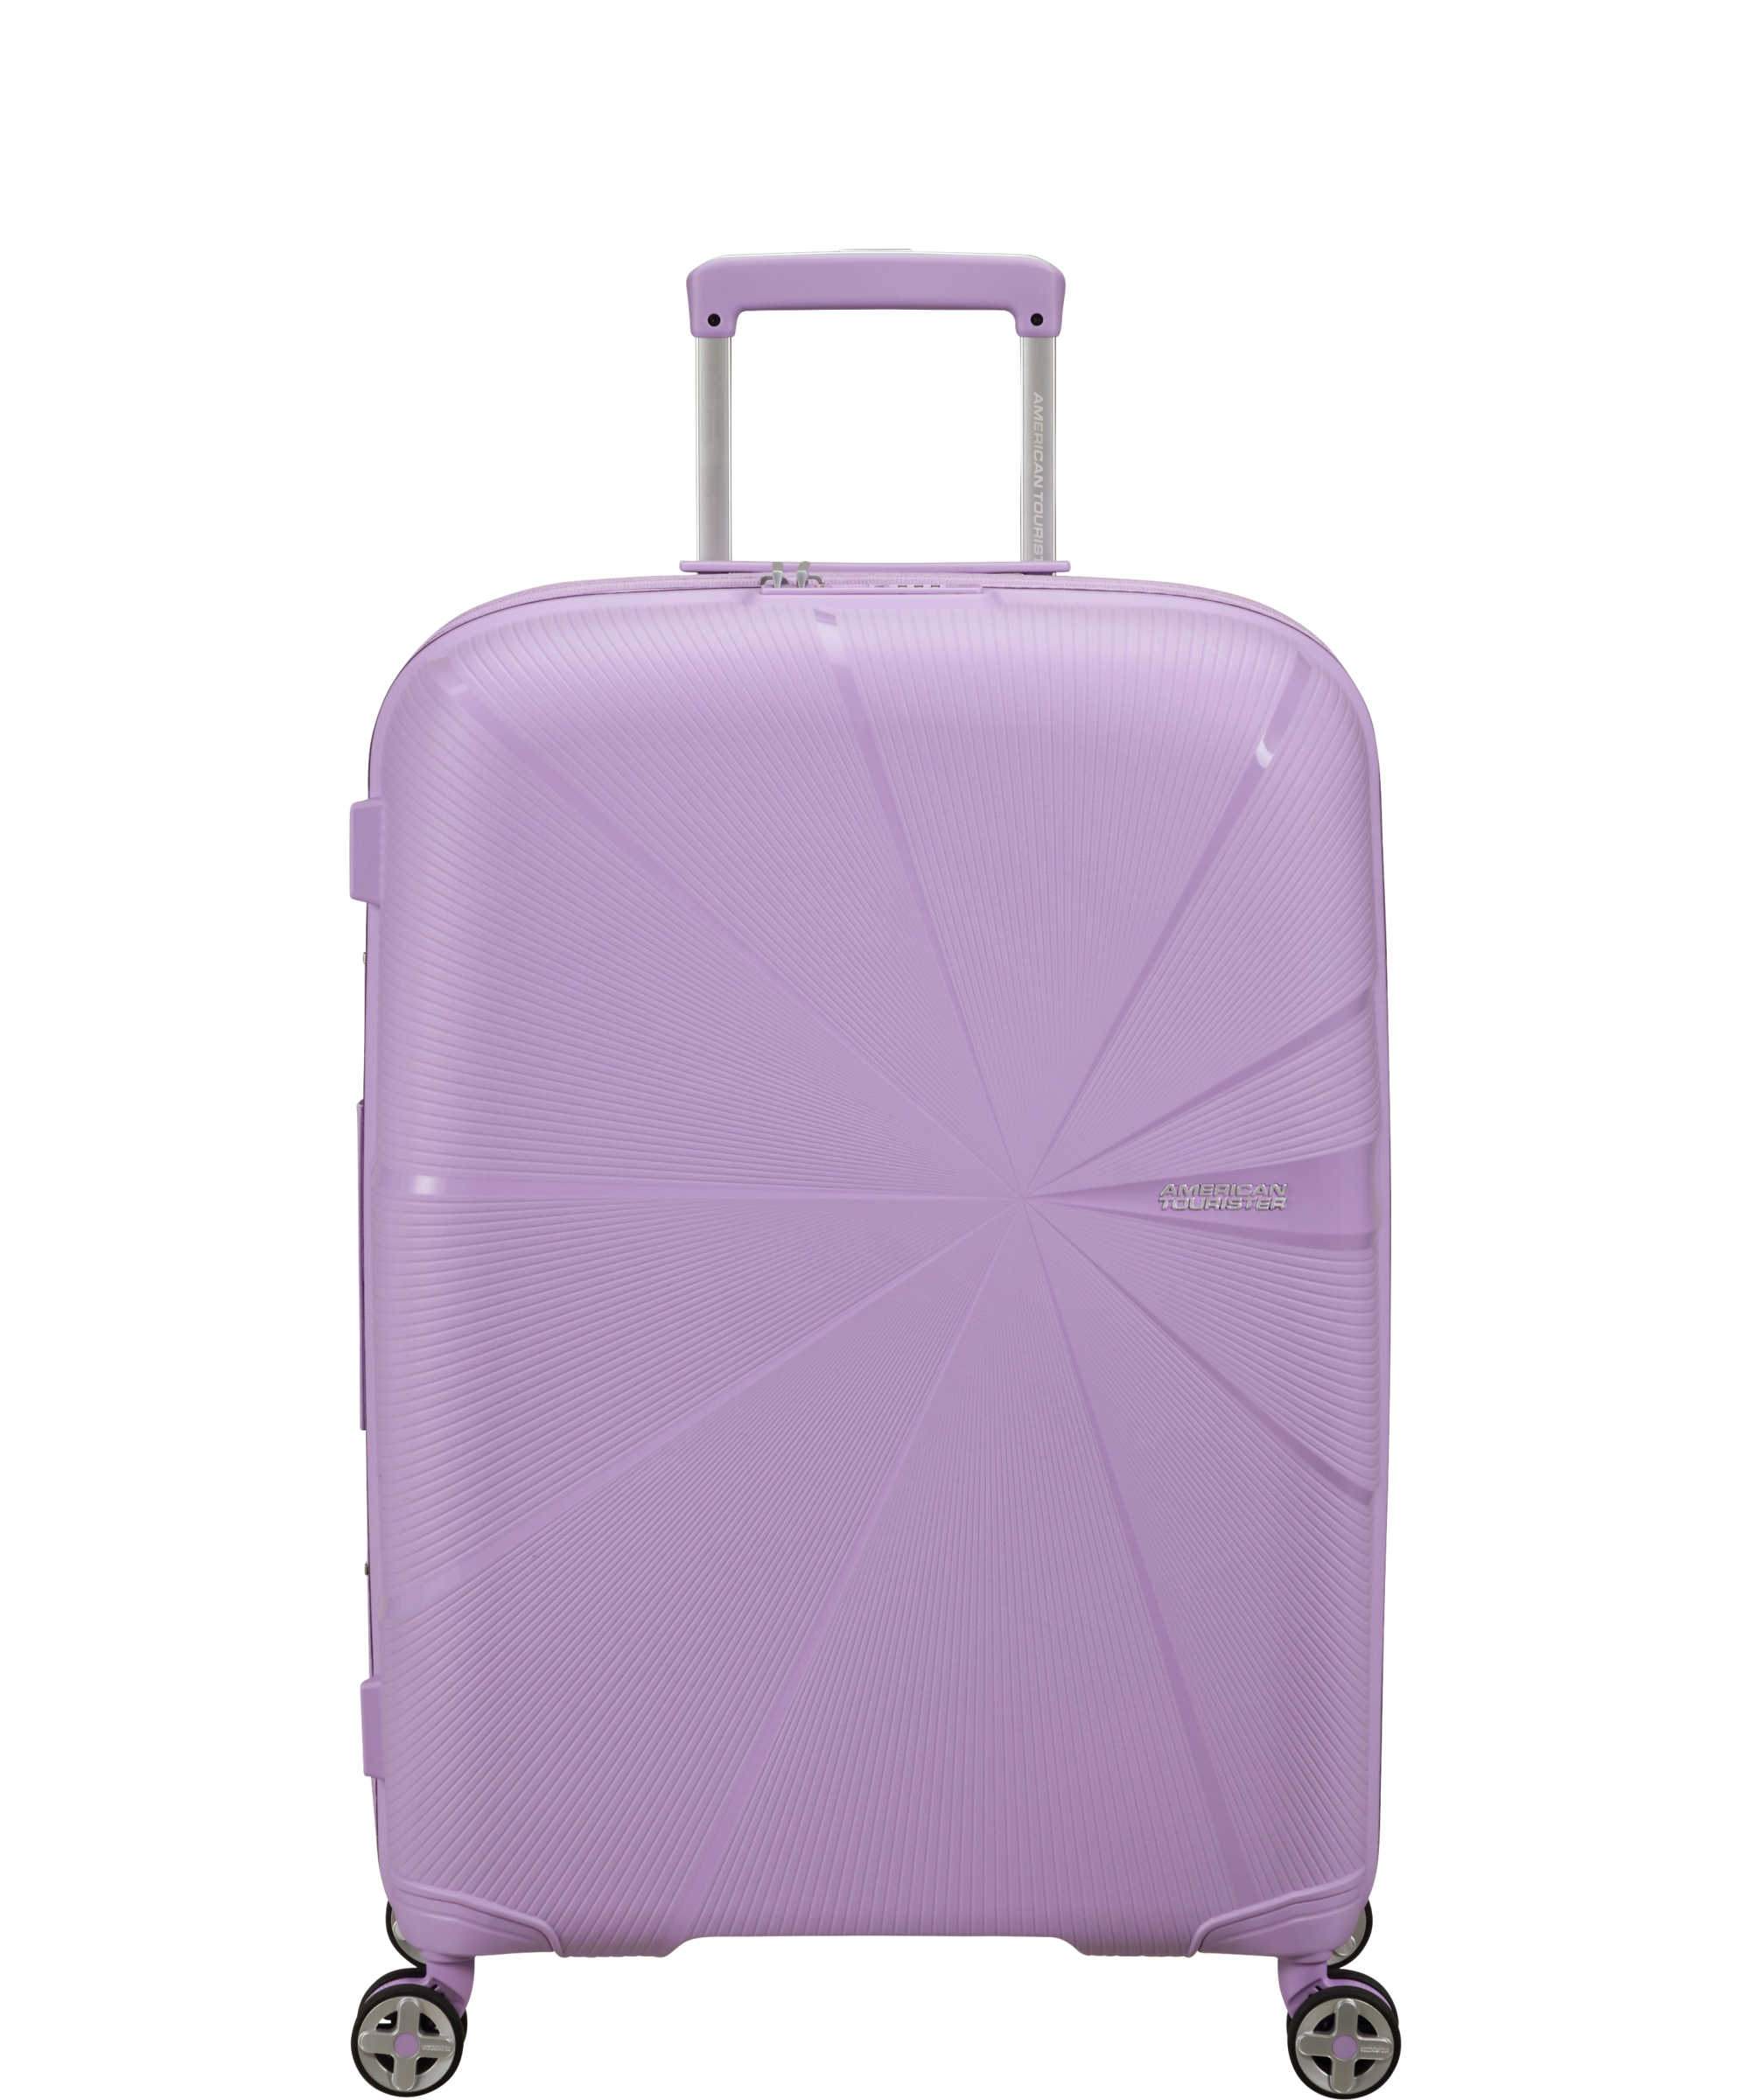 Best-Rated Checked Suitcases: Medium-Size Suitcases on Amazon - Thrillist